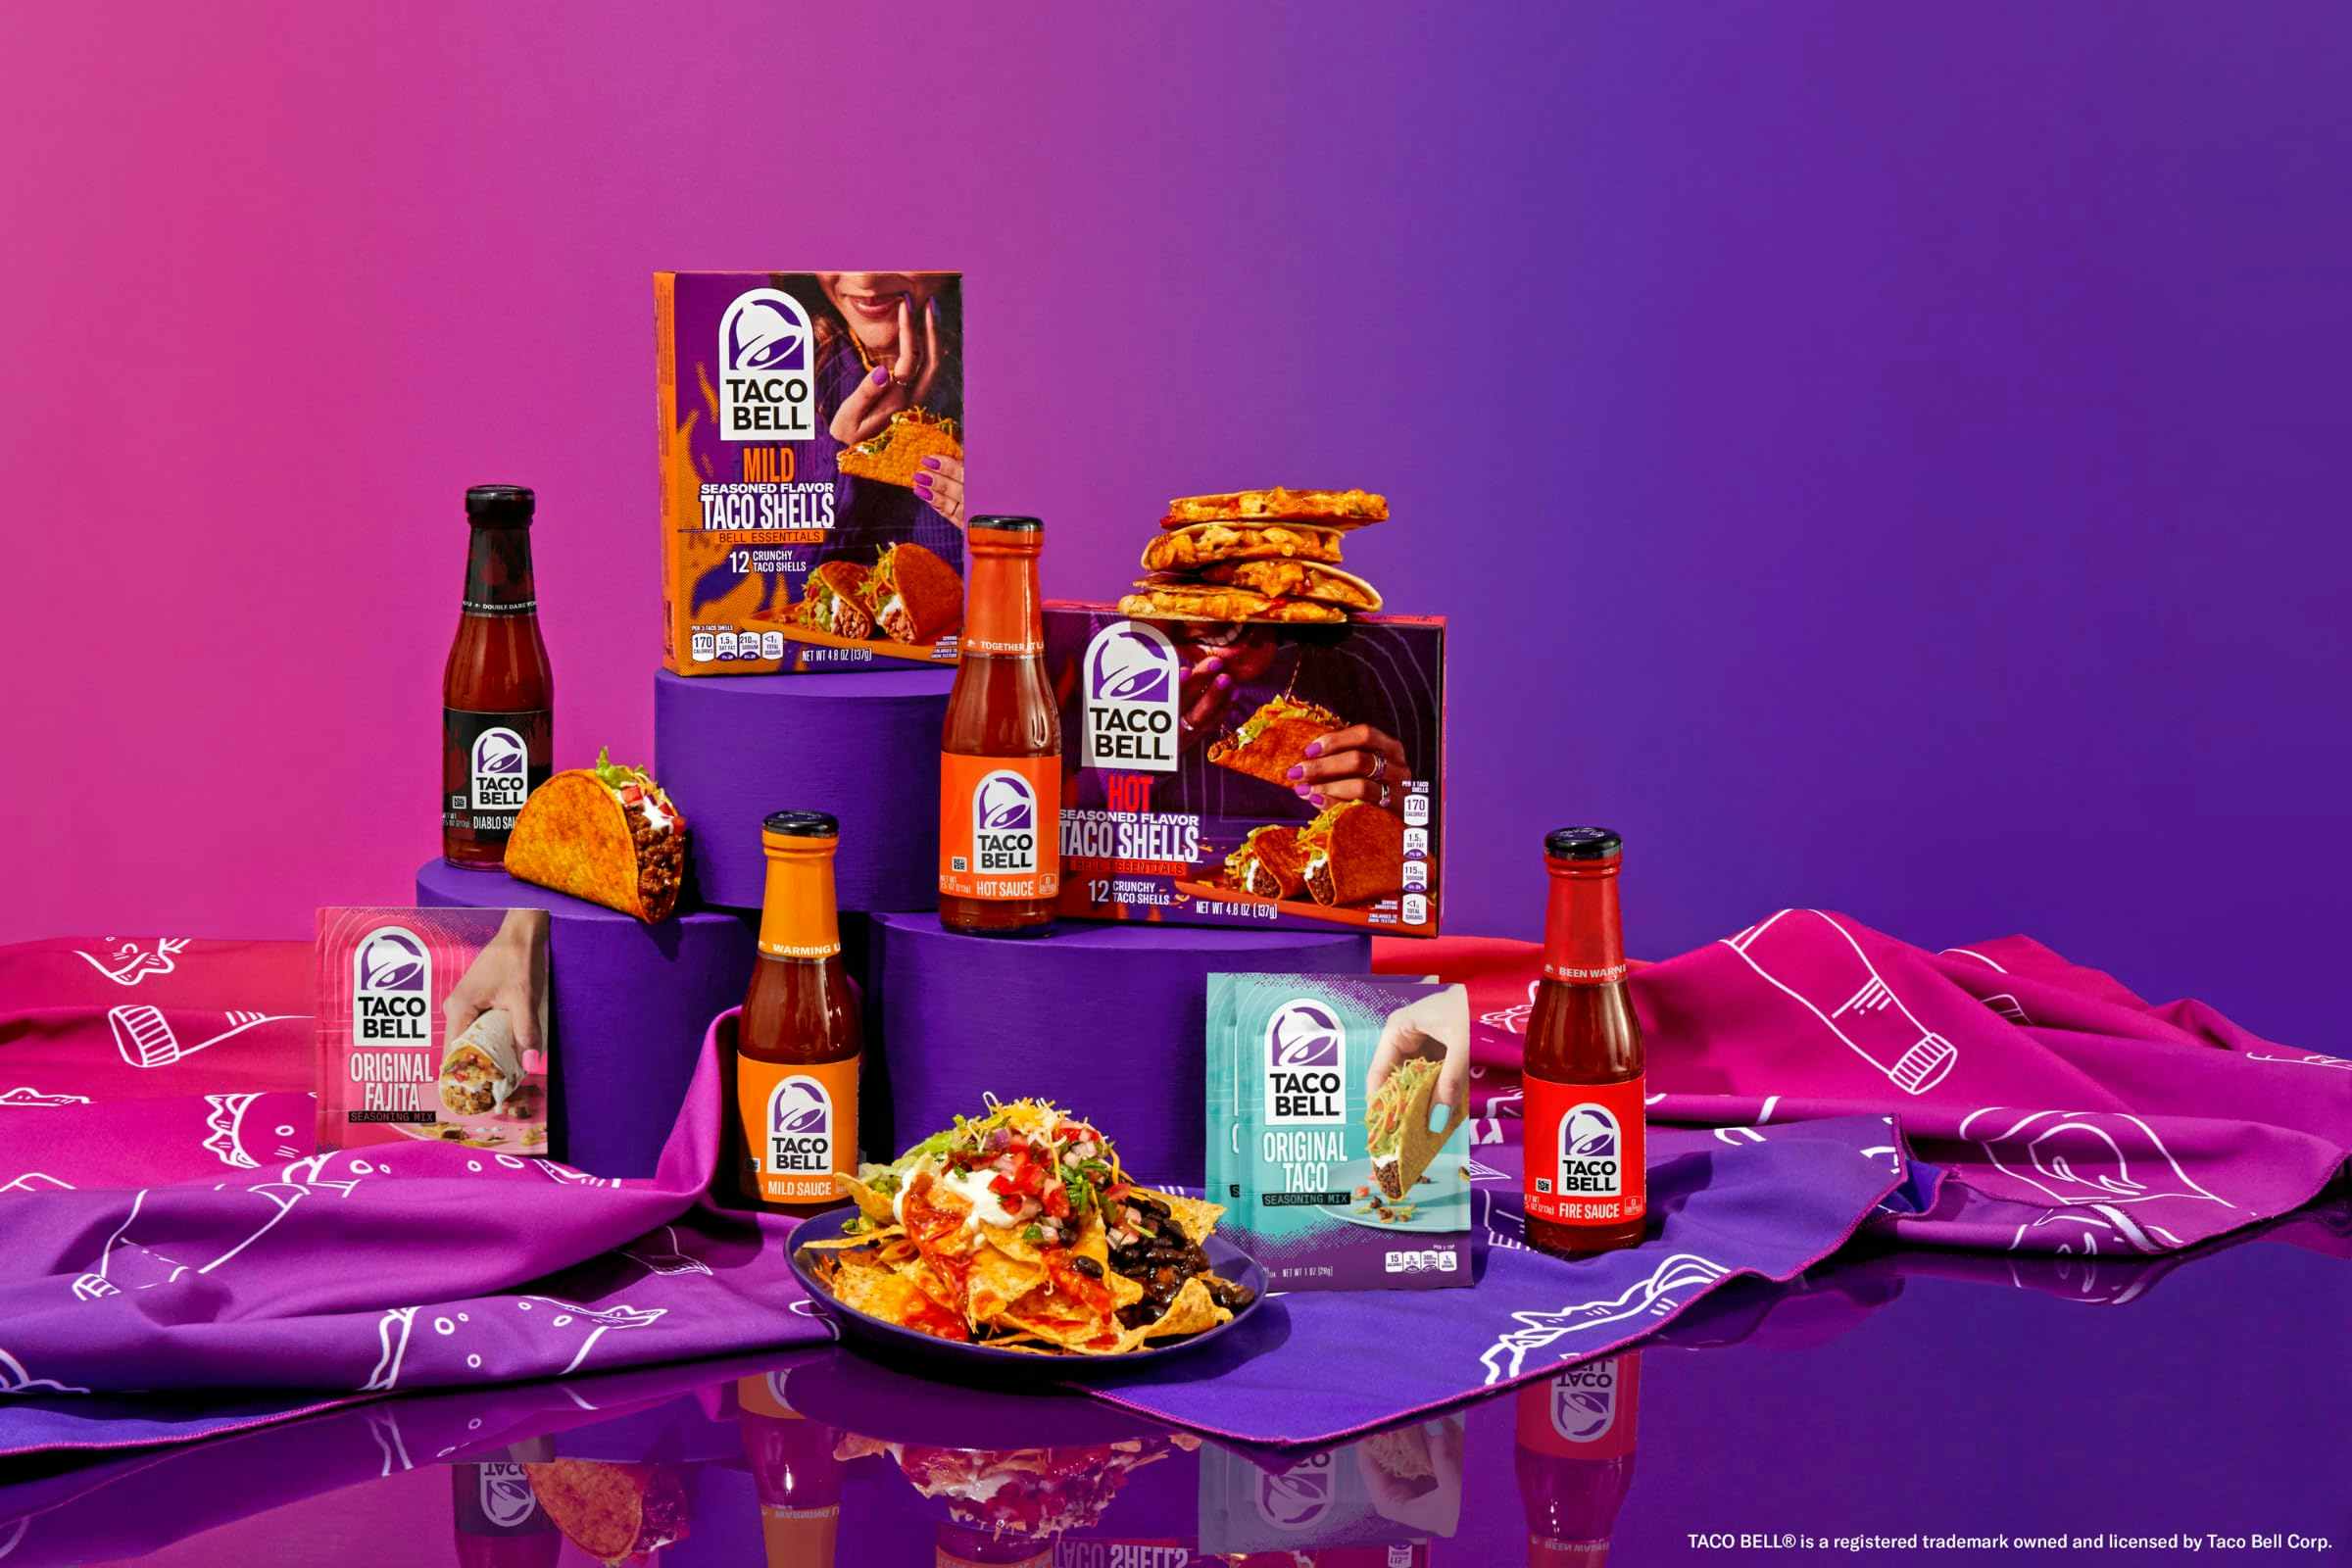 the contents of the Taco Bell SOS box